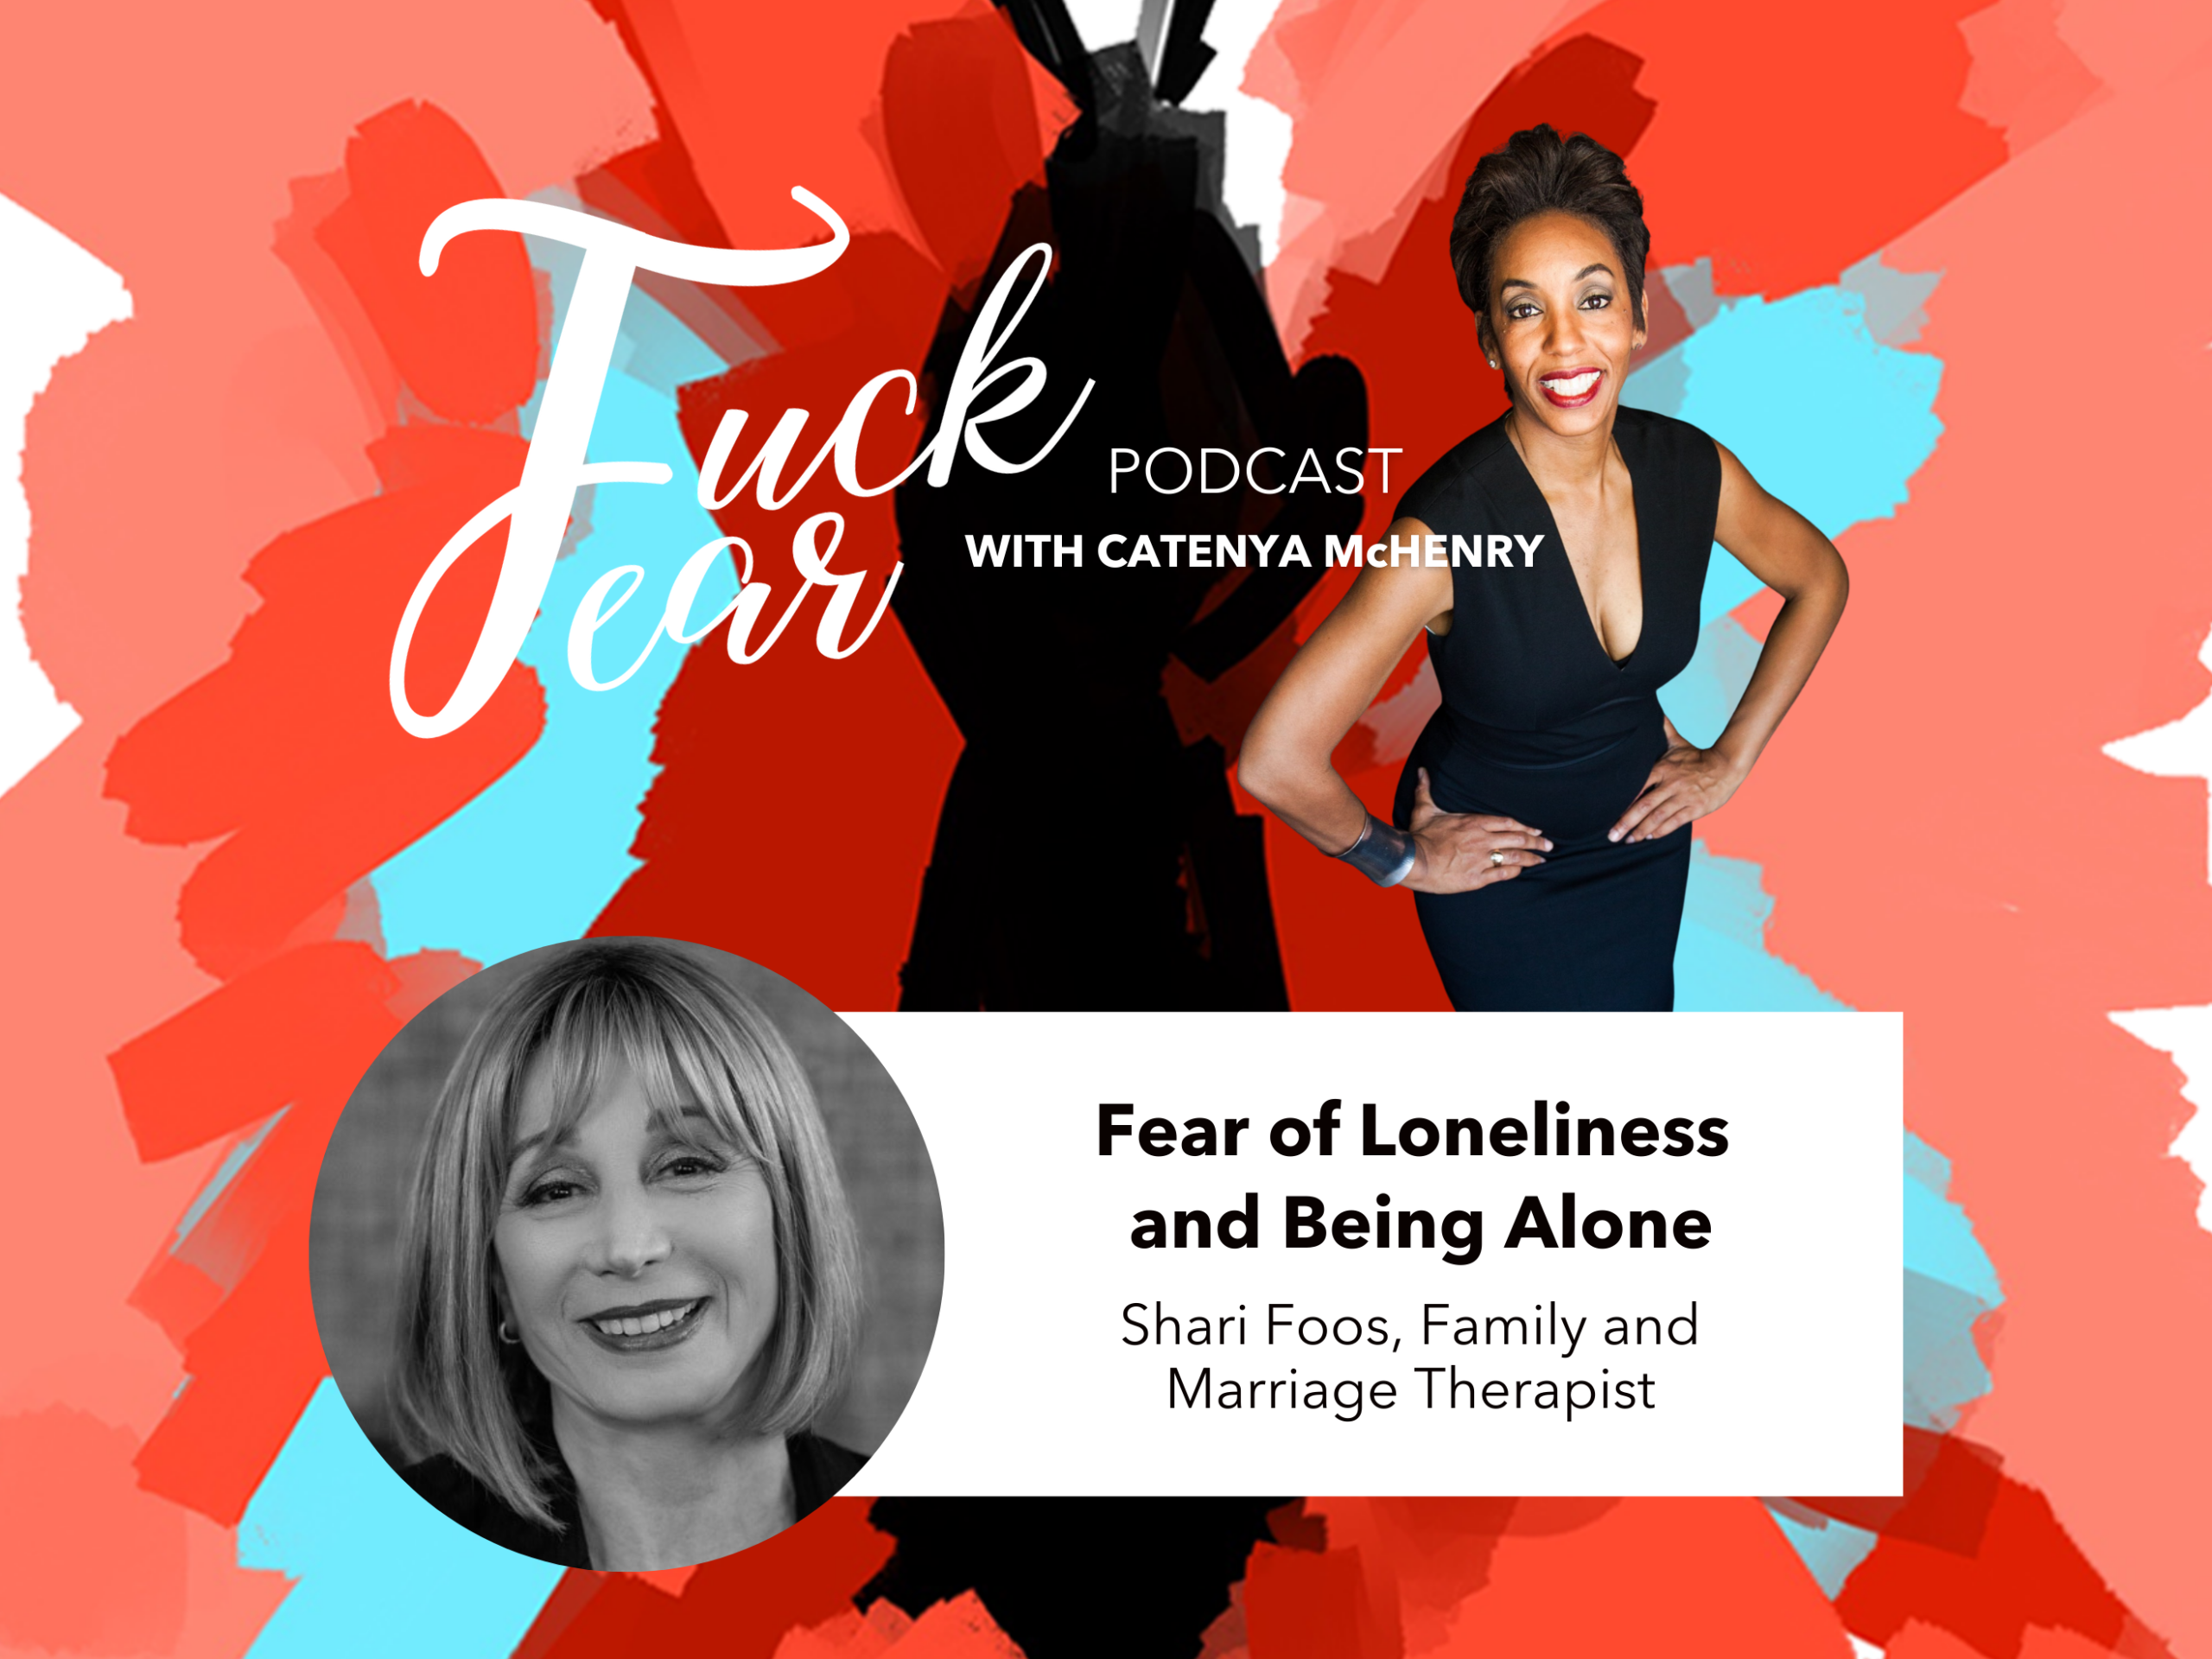 Podcast: Fear of Loneliness and Being Alone // Fxck Fear